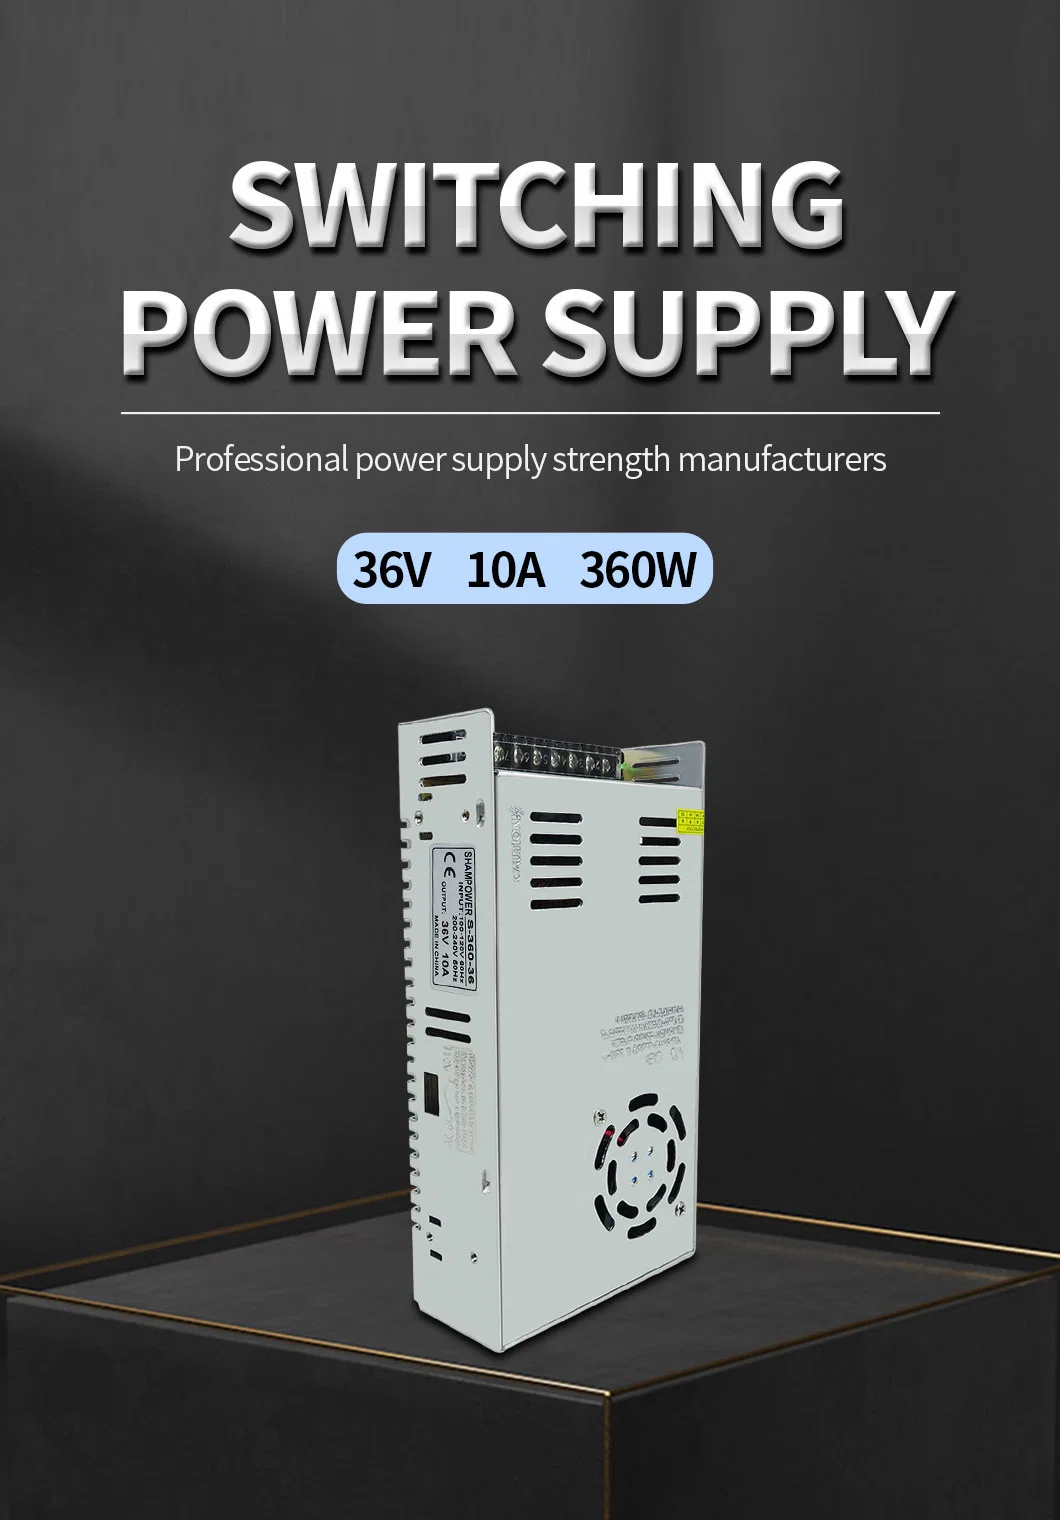 LED DC 36V 10A 360W Switching Power Supply for LED Lighting